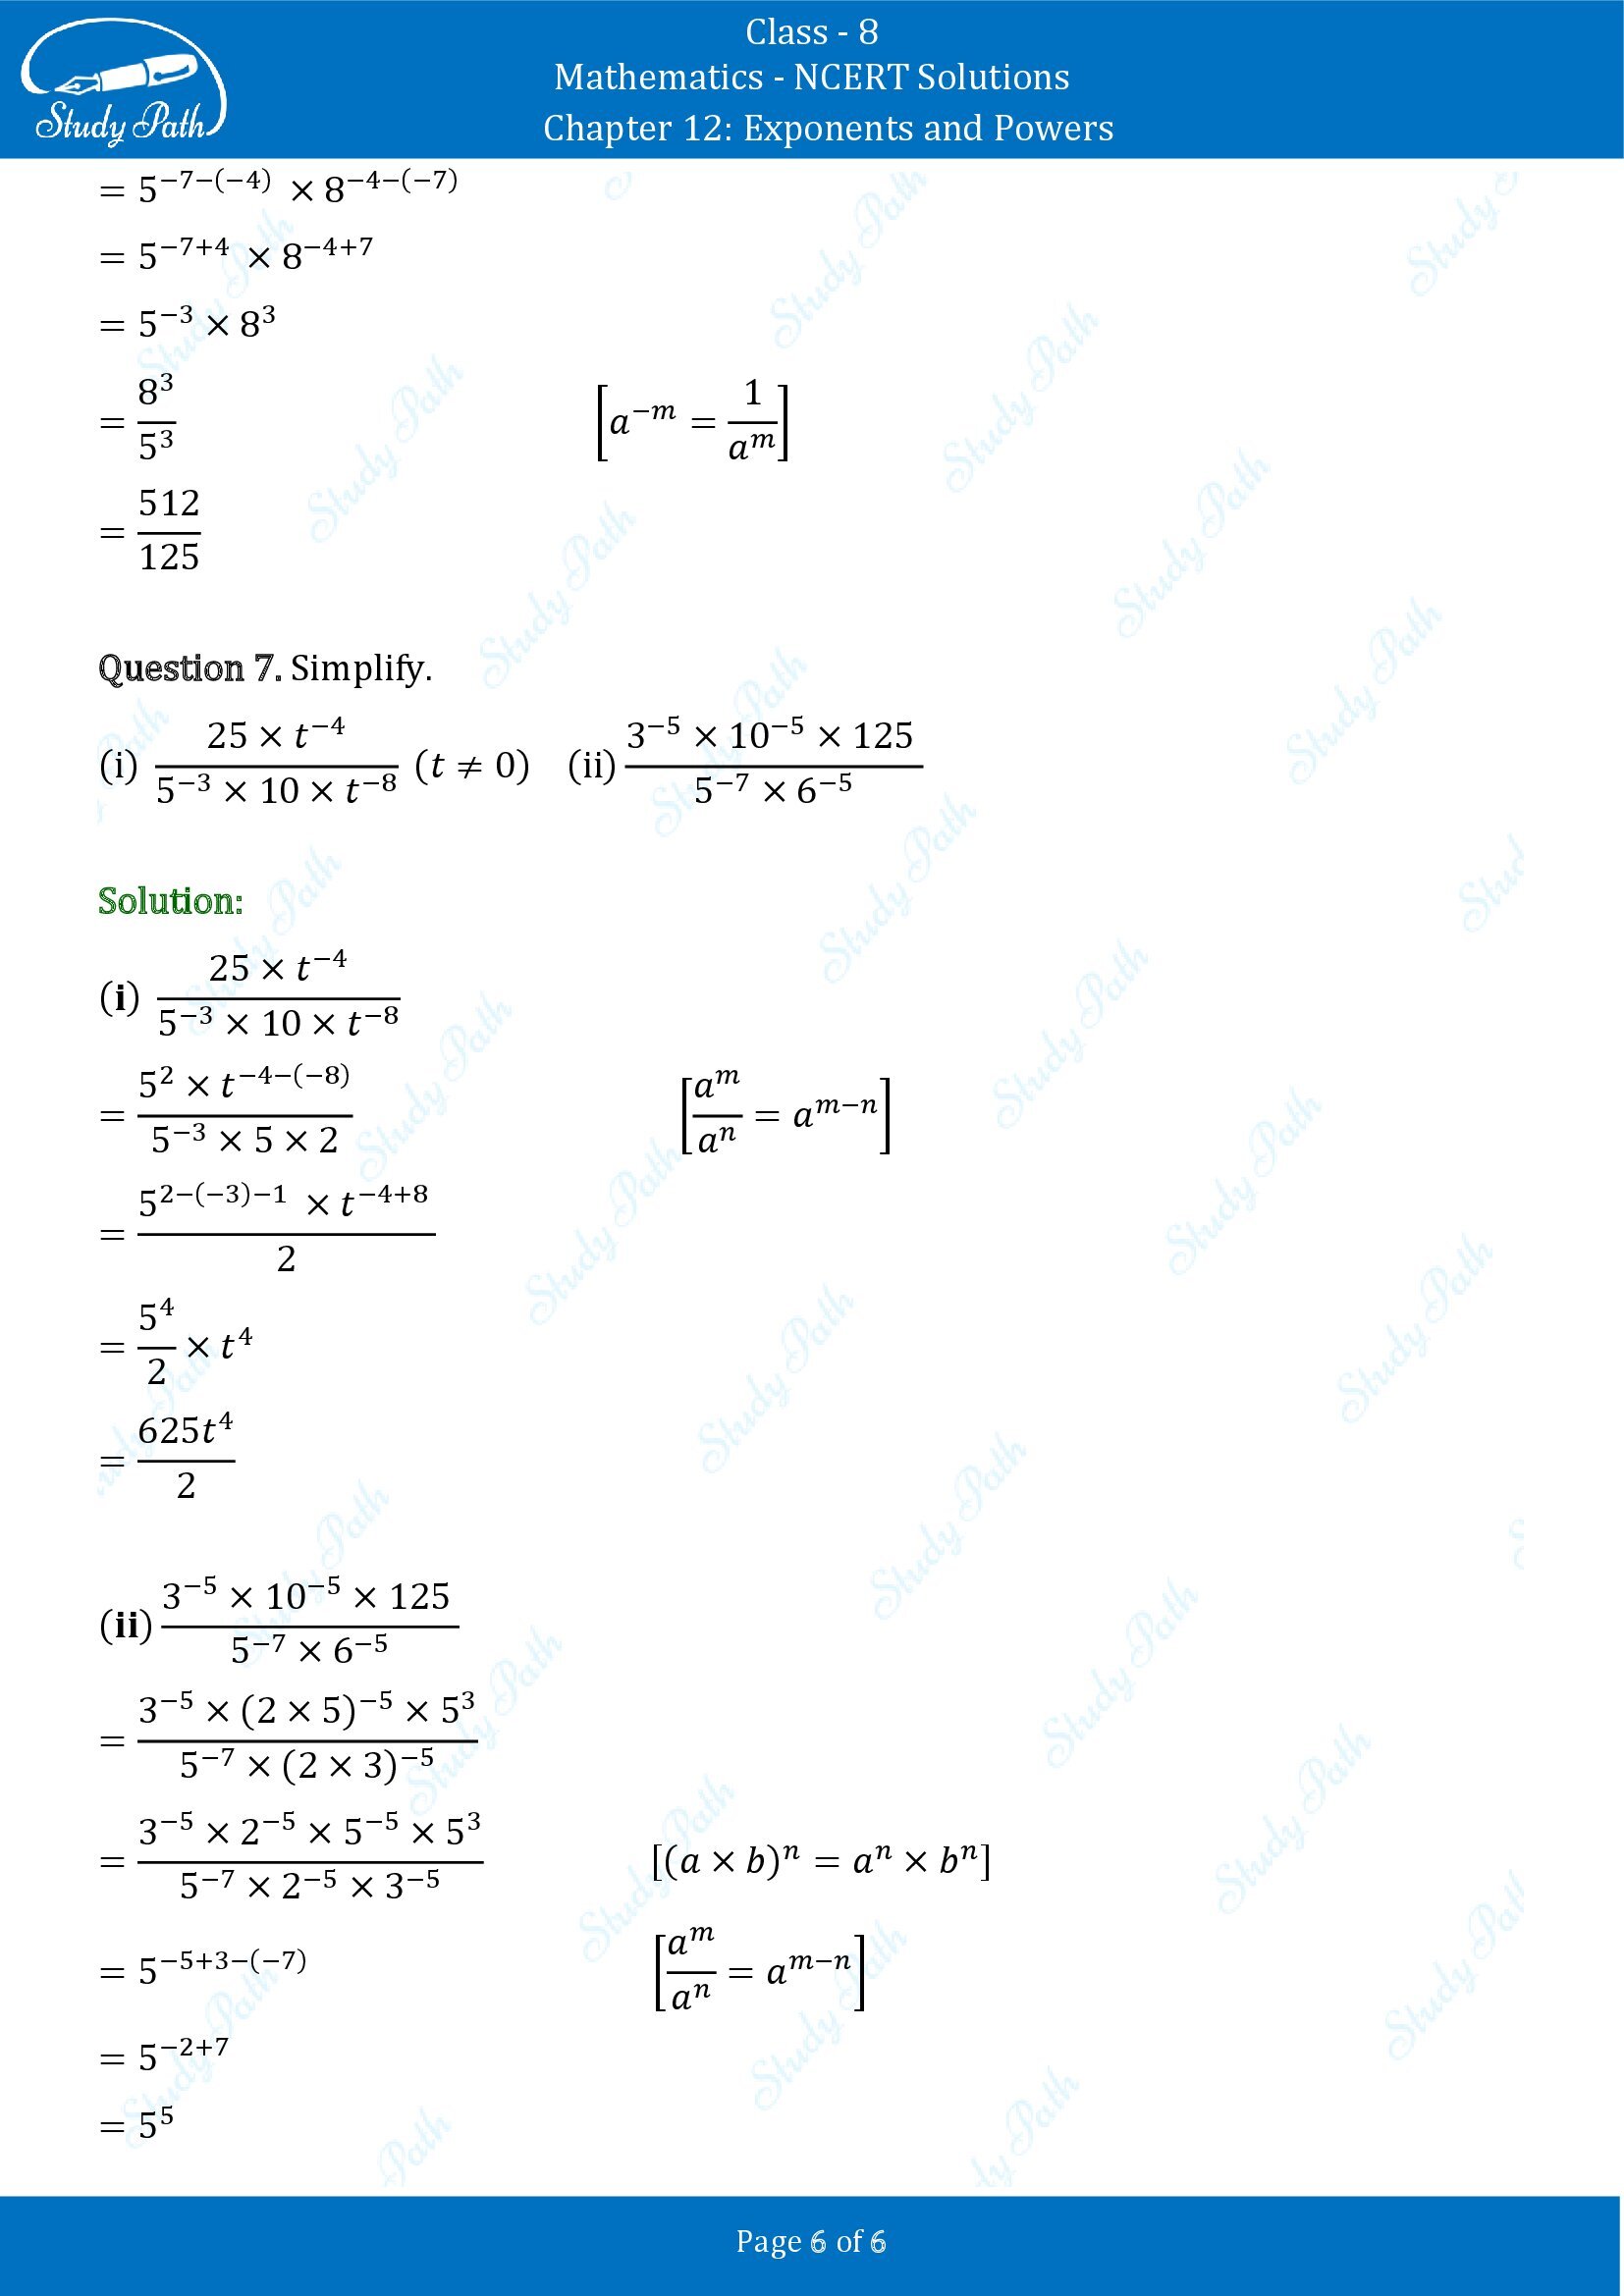 NCERT Solutions for Class 8 Maths Chapter 12 Exponents and Powers Exercise 12.1 00006